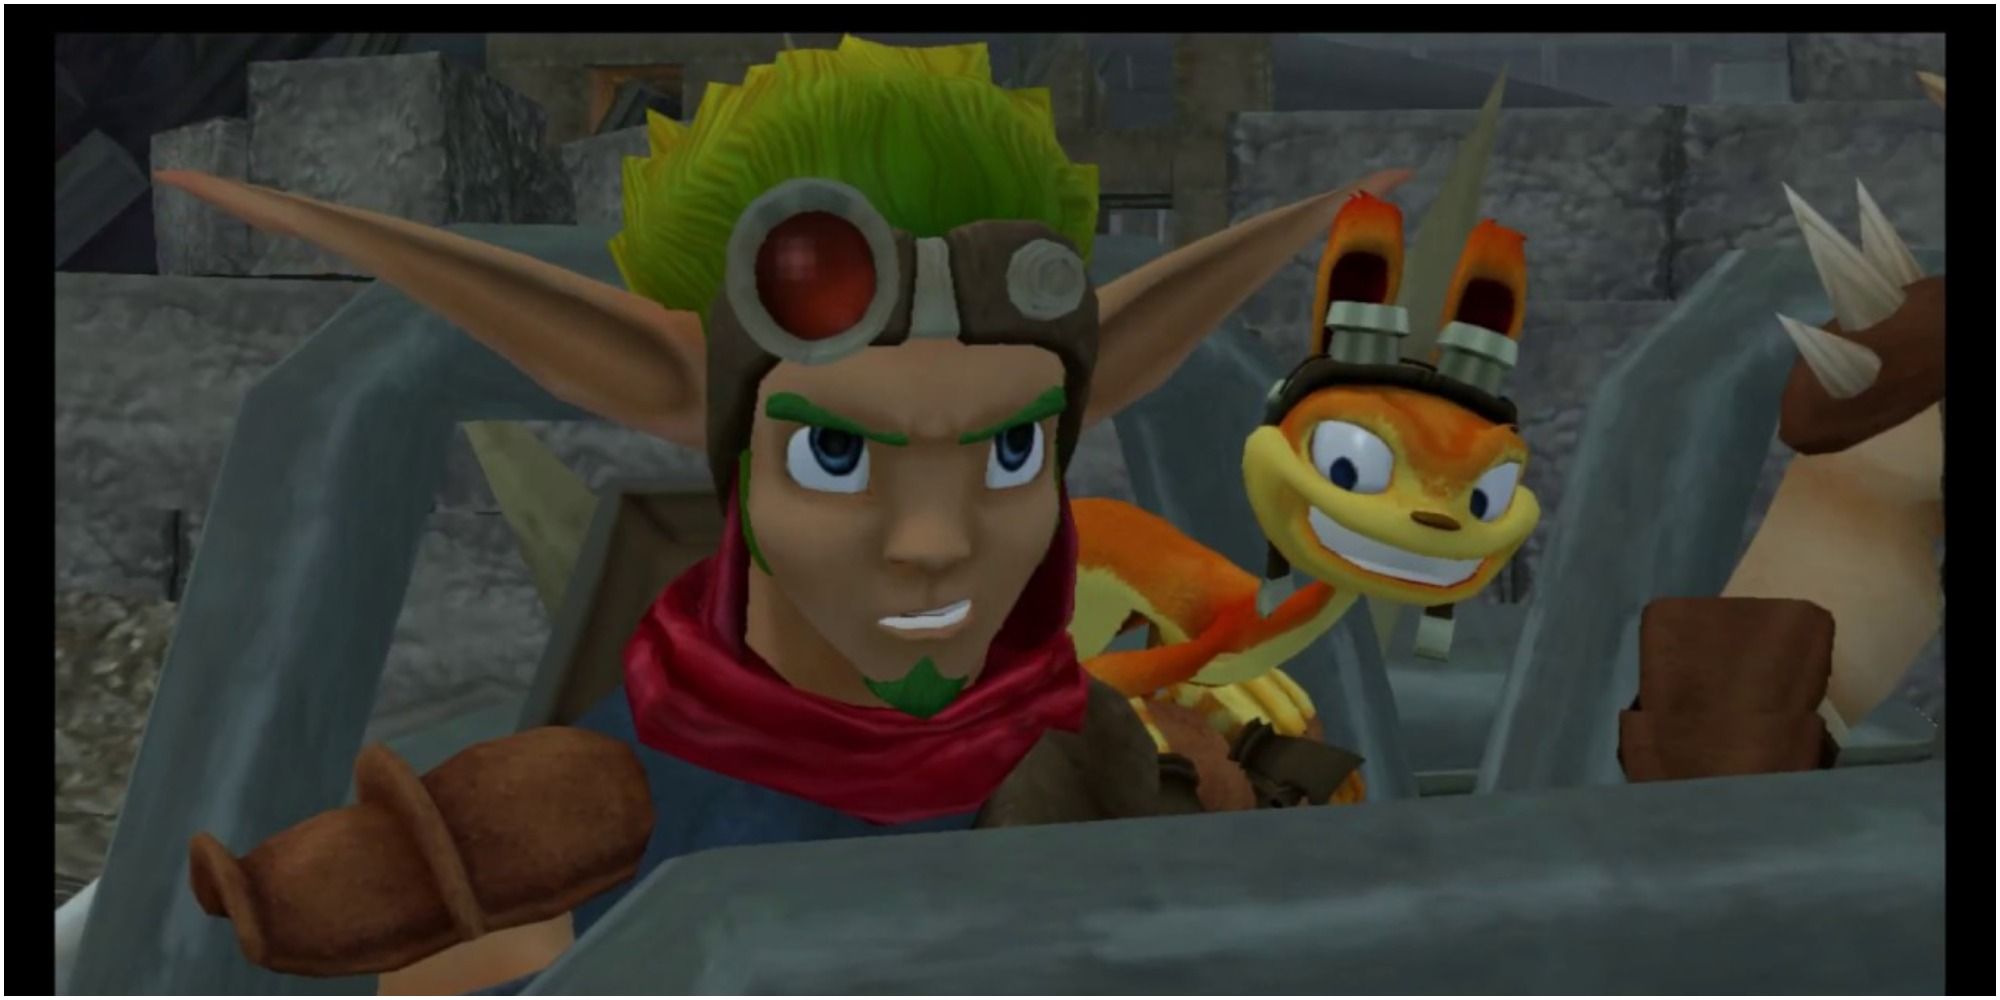 Jak and Daxter in a vehicle